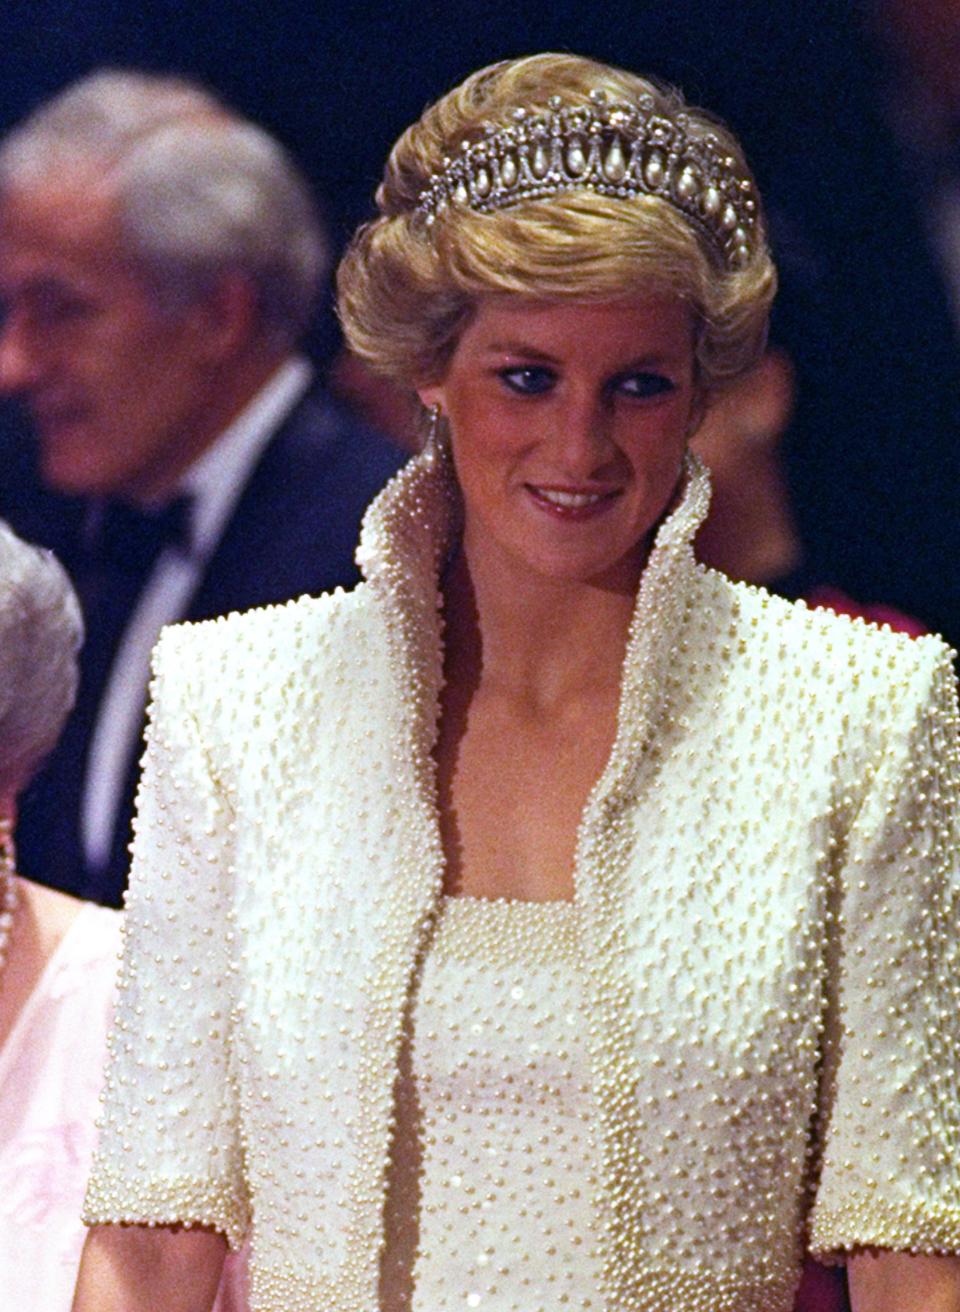 Princess Diana on an official visit to Hong Kong in November 1989. The dress is included in 'Diana: Her Fashion Story' that opened at Kensington Palace in February 2017.